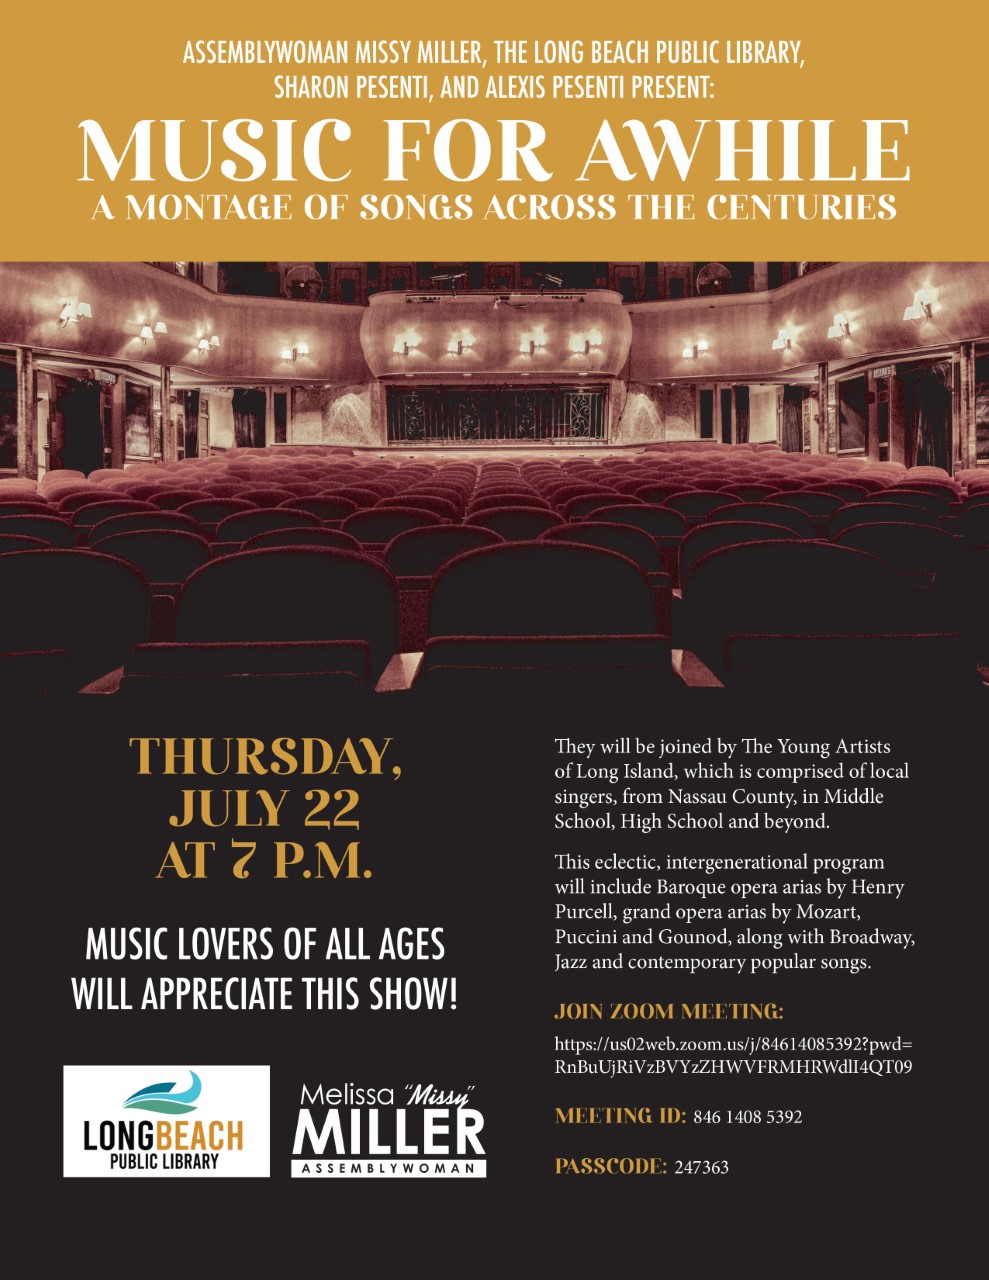 Music for Awhile Concert Assemblywoman Miller